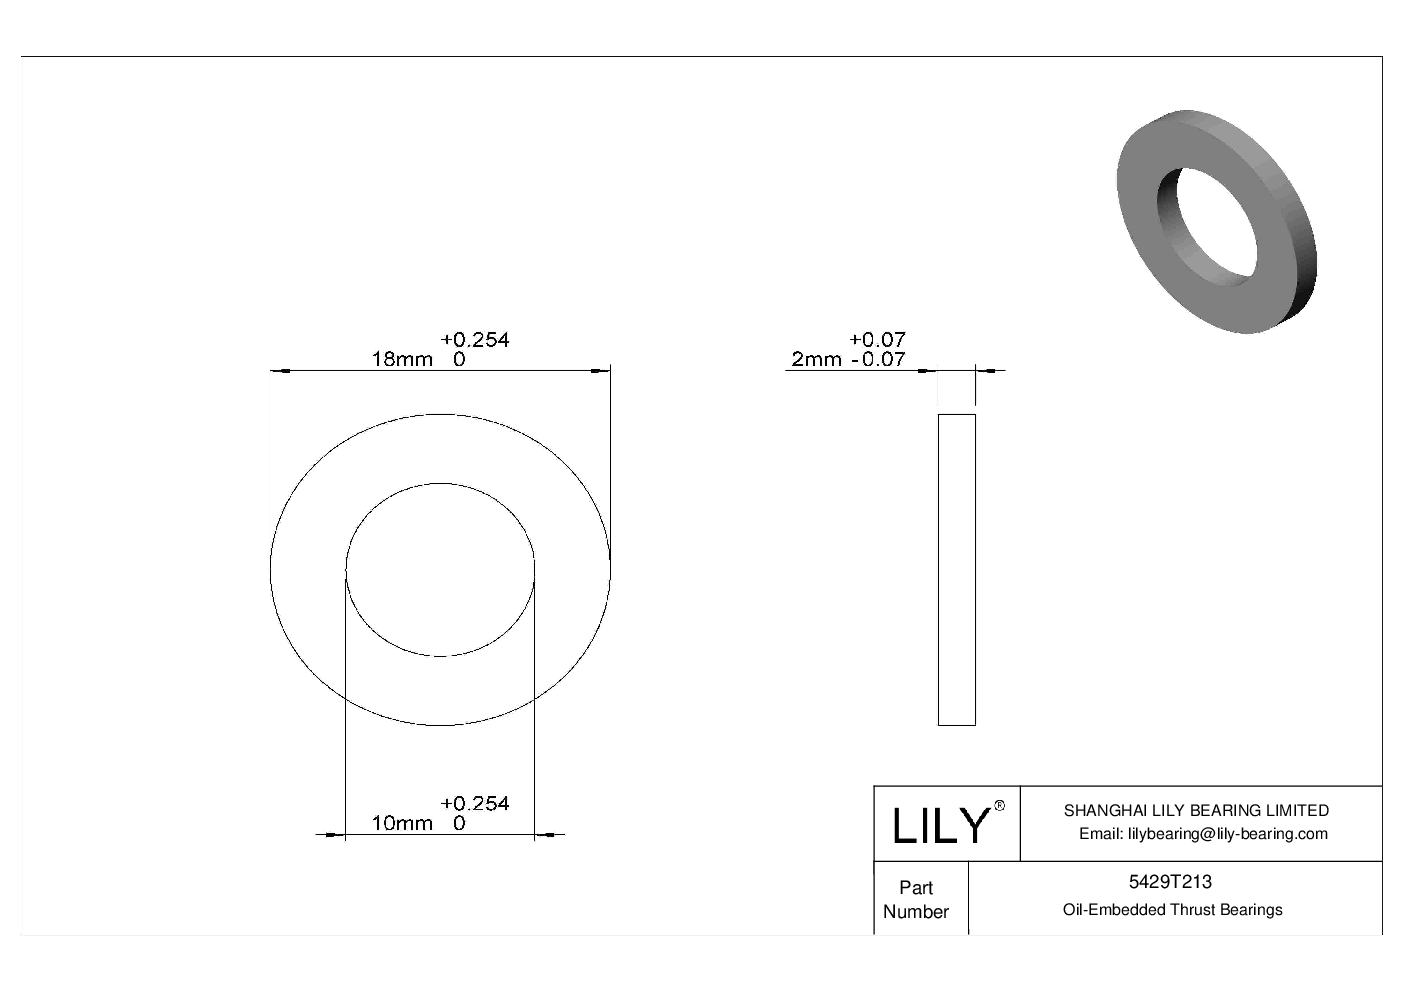 FECJTCBD Food Industry Oil-Embedded Thrust Bearings cad drawing